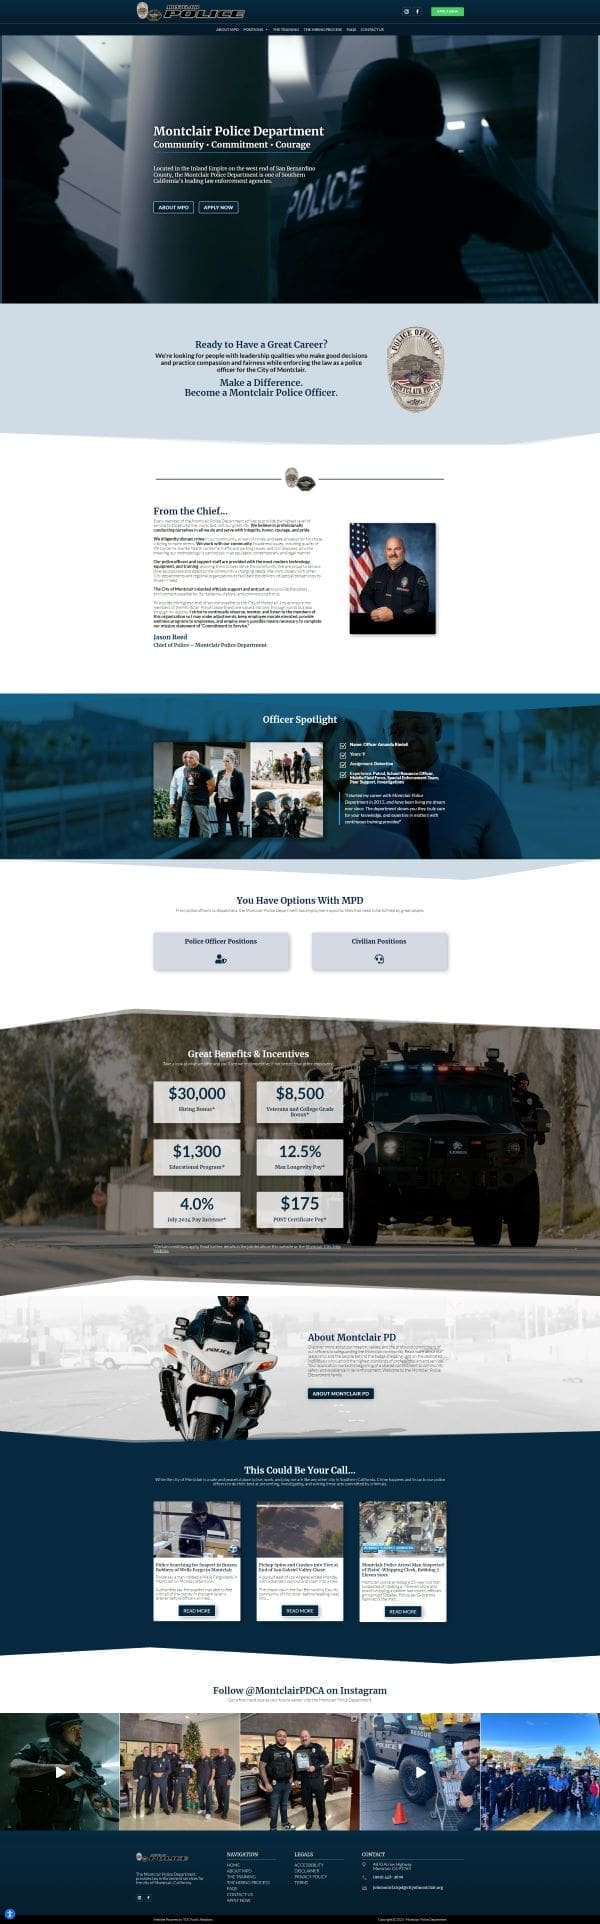 Montclair Police Department's Recruitment Website Home Page